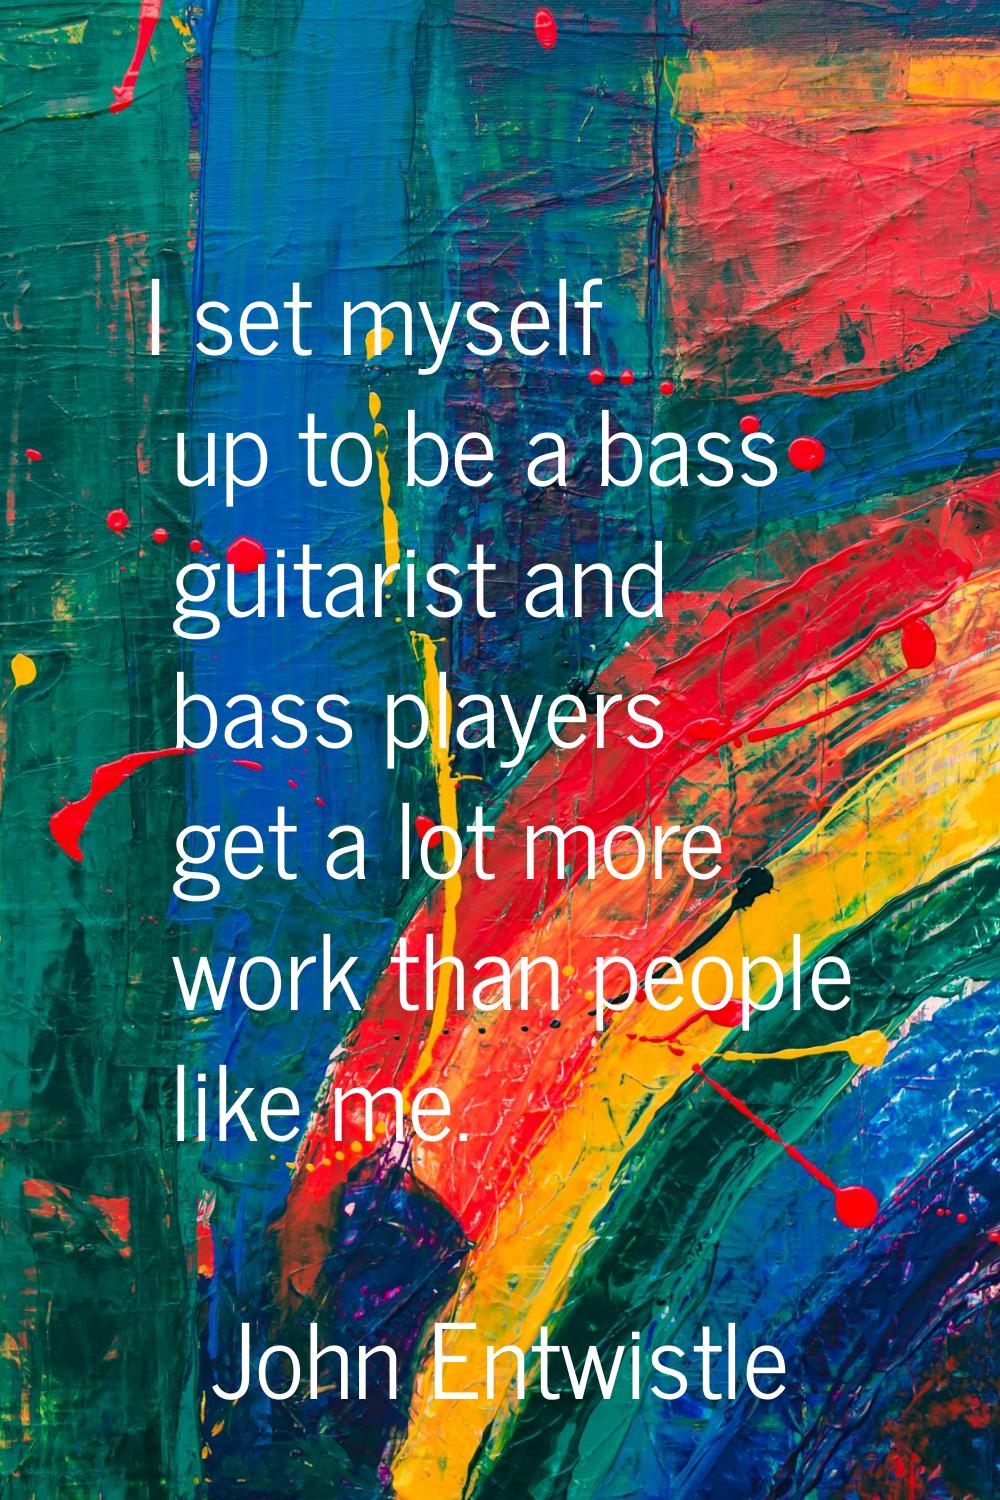 I set myself up to be a bass guitarist and bass players get a lot more work than people like me.